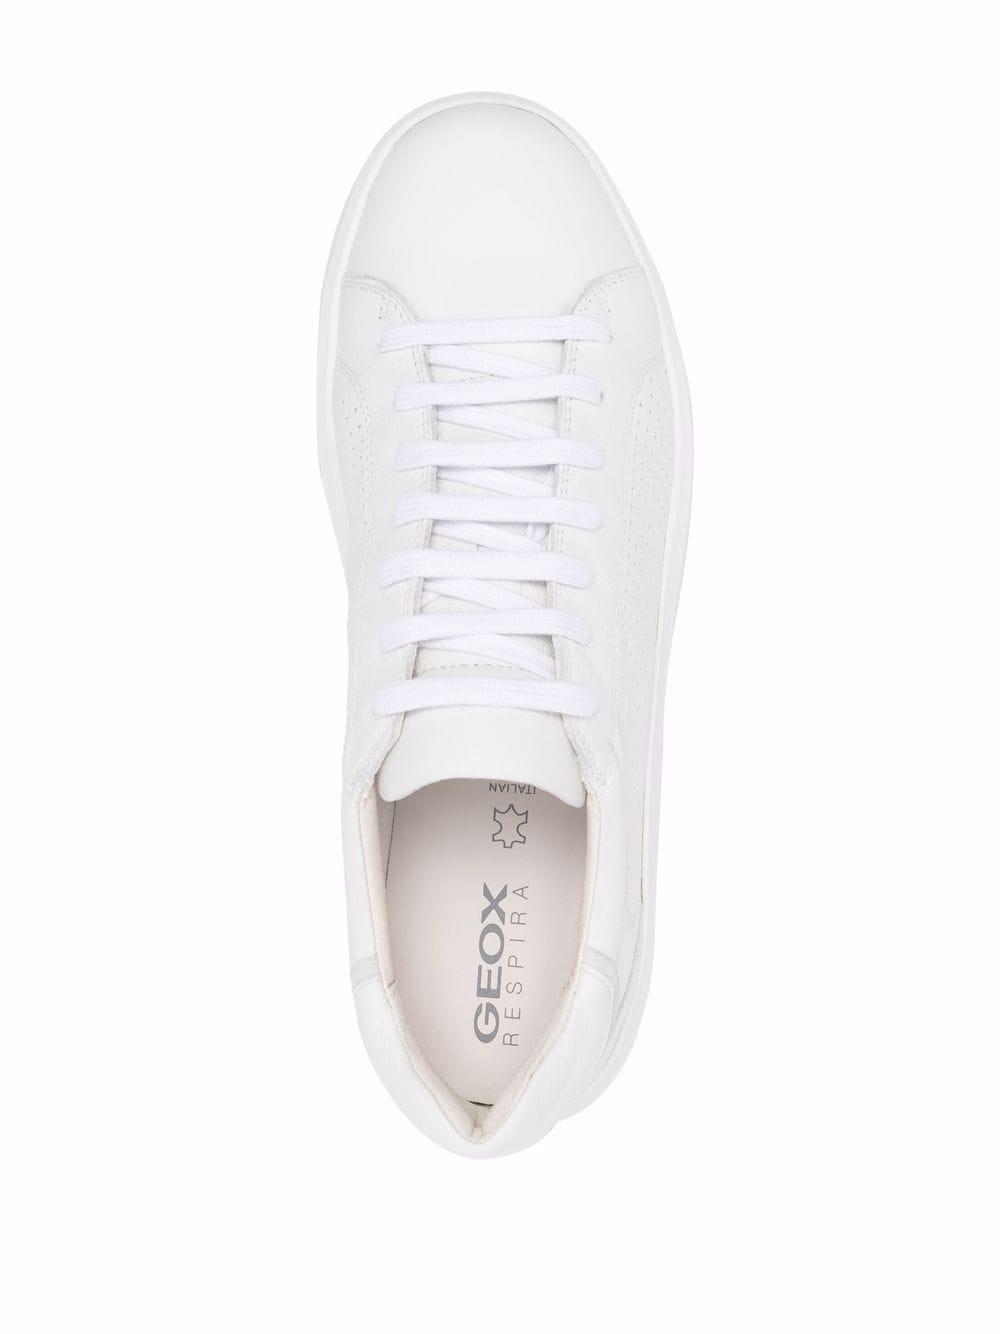 Geox Leather Velletri Low-top Sneakers in White for Men | Lyst